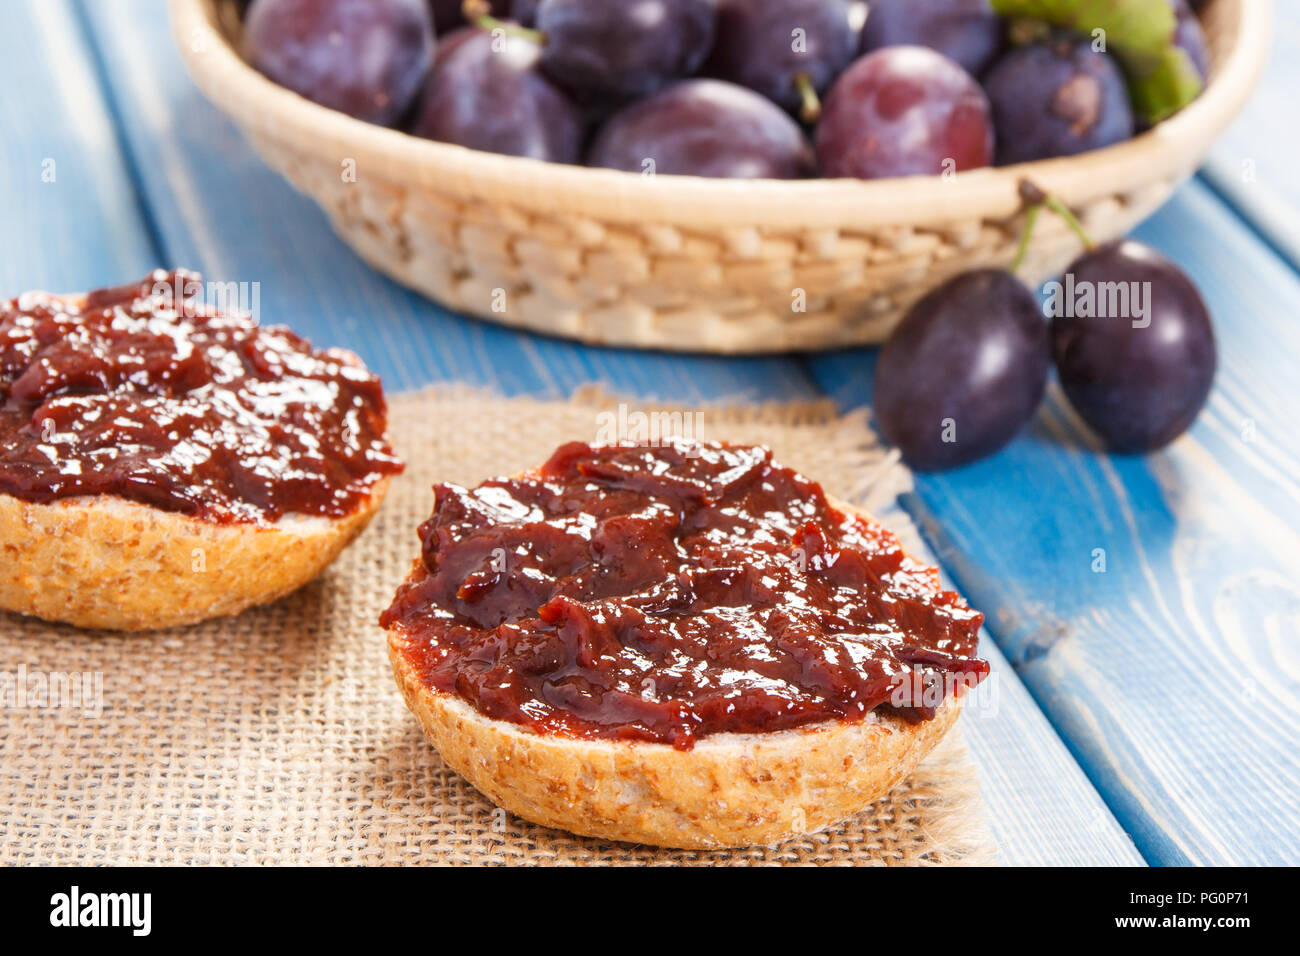 Sandwiches with plum marmalade or jam, concept of healthy sweet snack or dessert Stock Photo